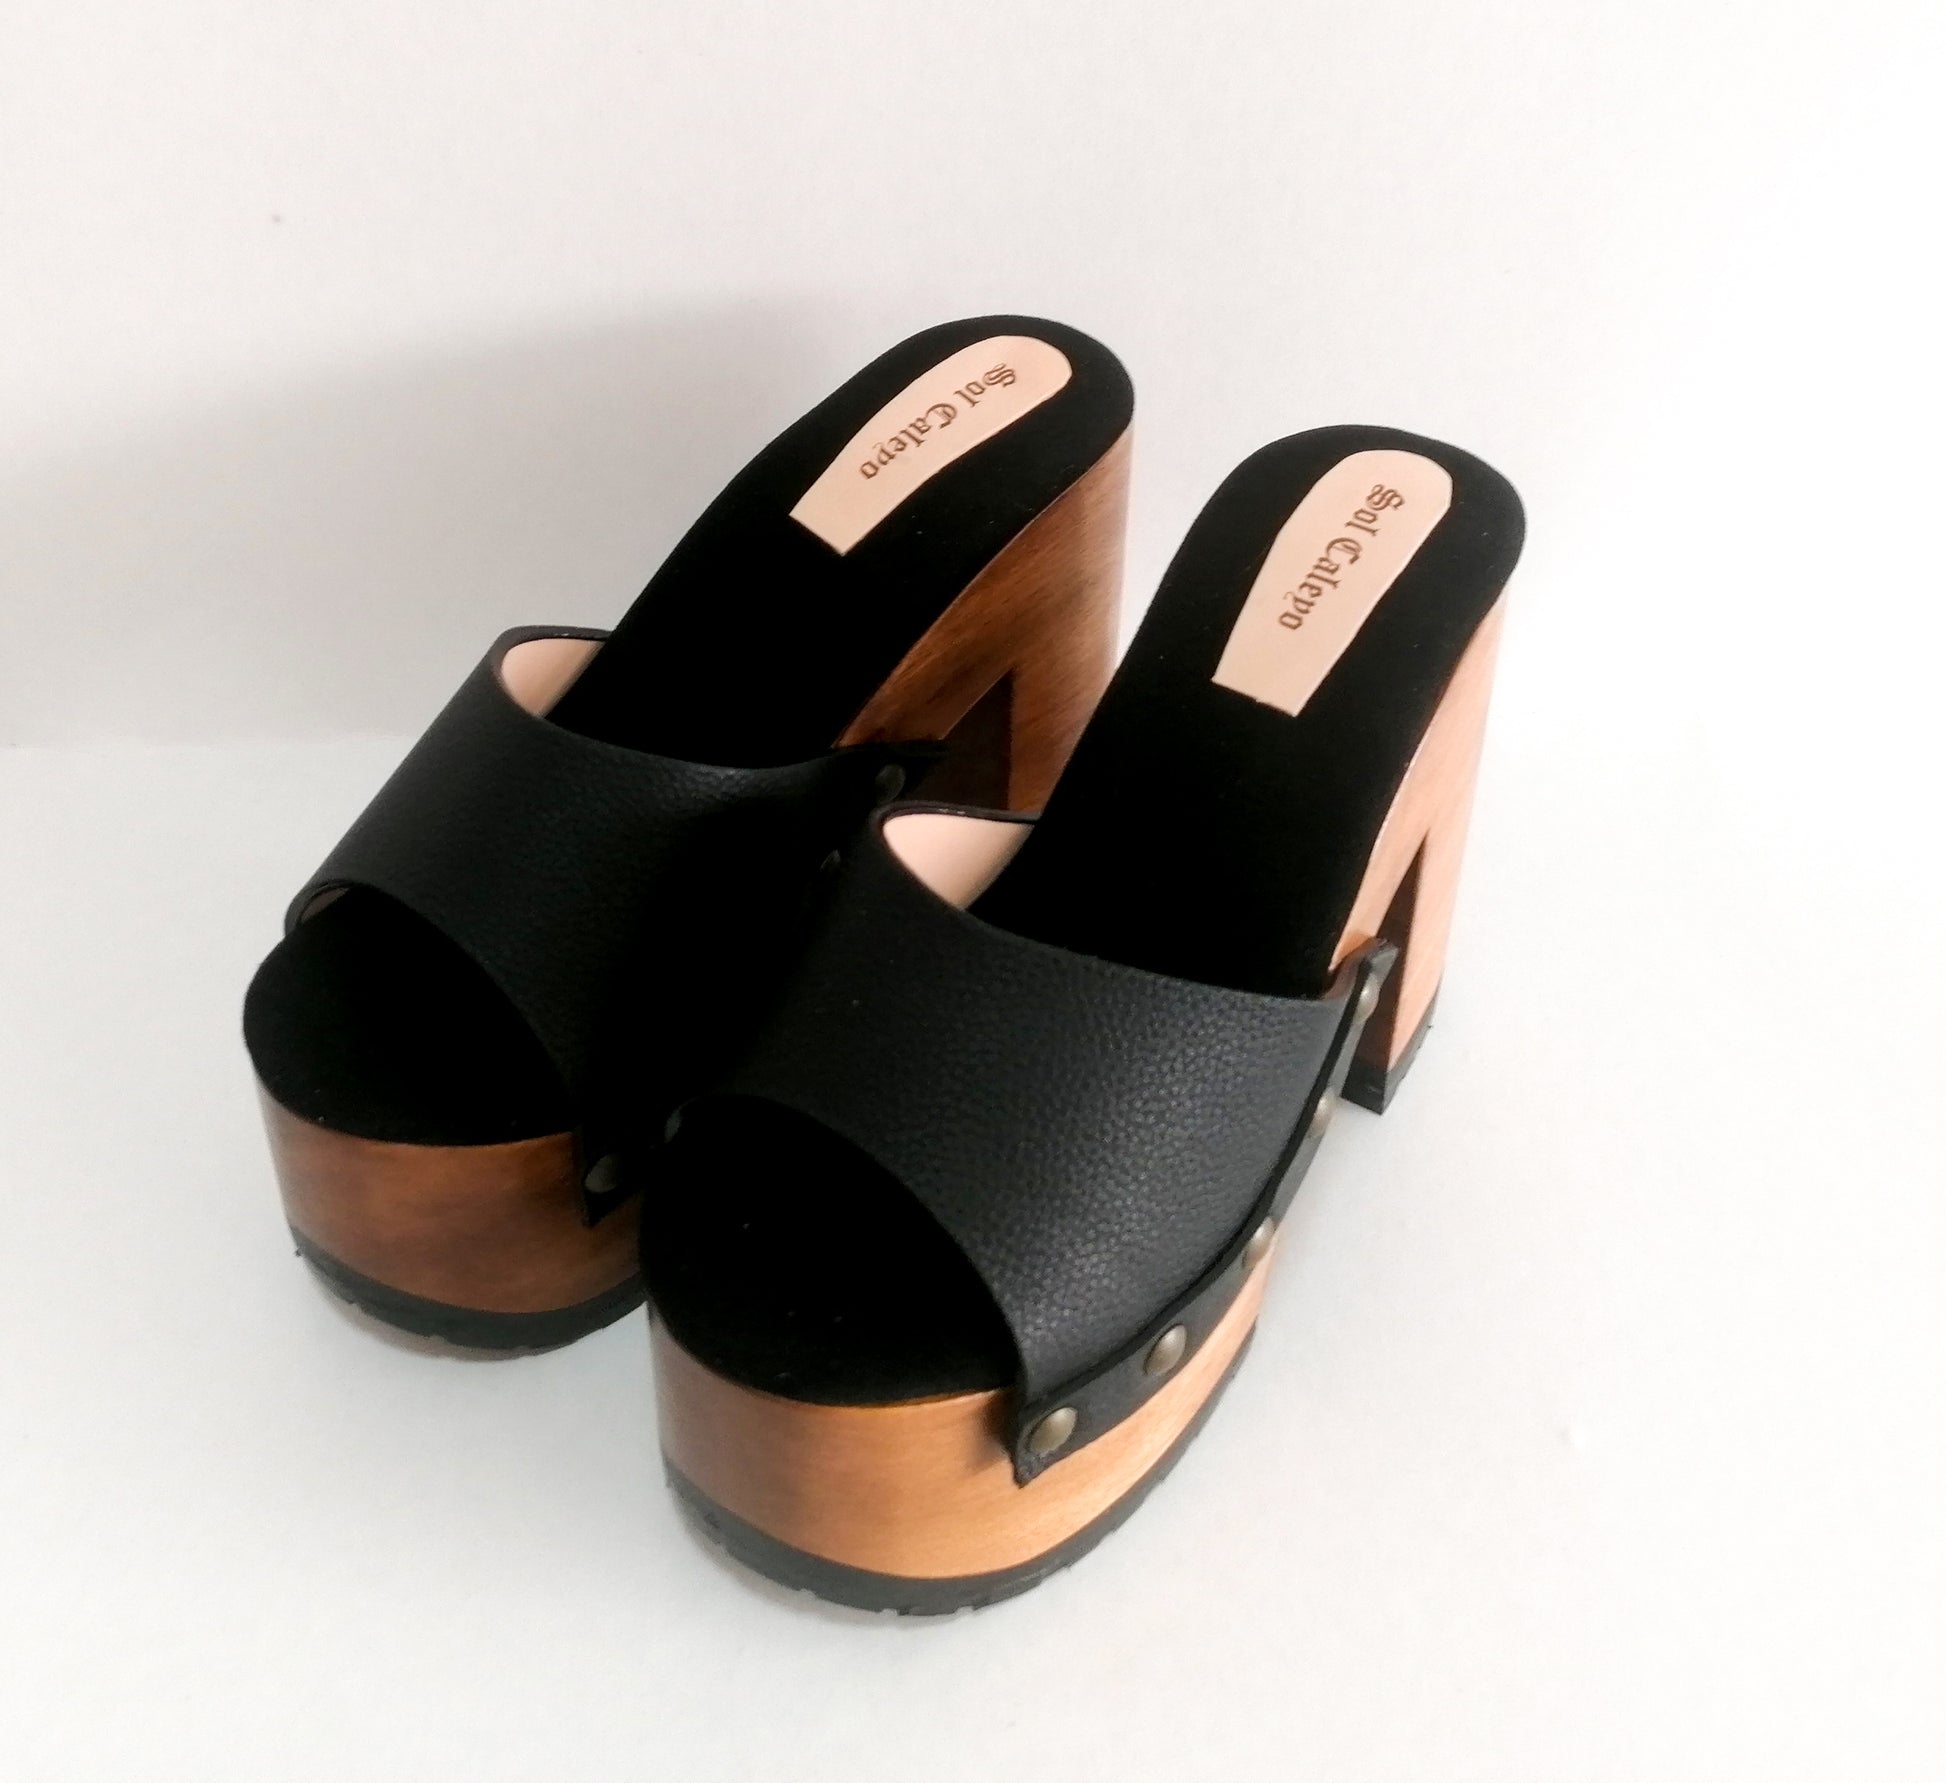 Black leather peep toe sandal. Platform sandal with super high wooden heel. Clog sandal 70's style. Sizes 34 to 47. High quality handmade leather shoes by sol Caleyo. Sustainable fashion.